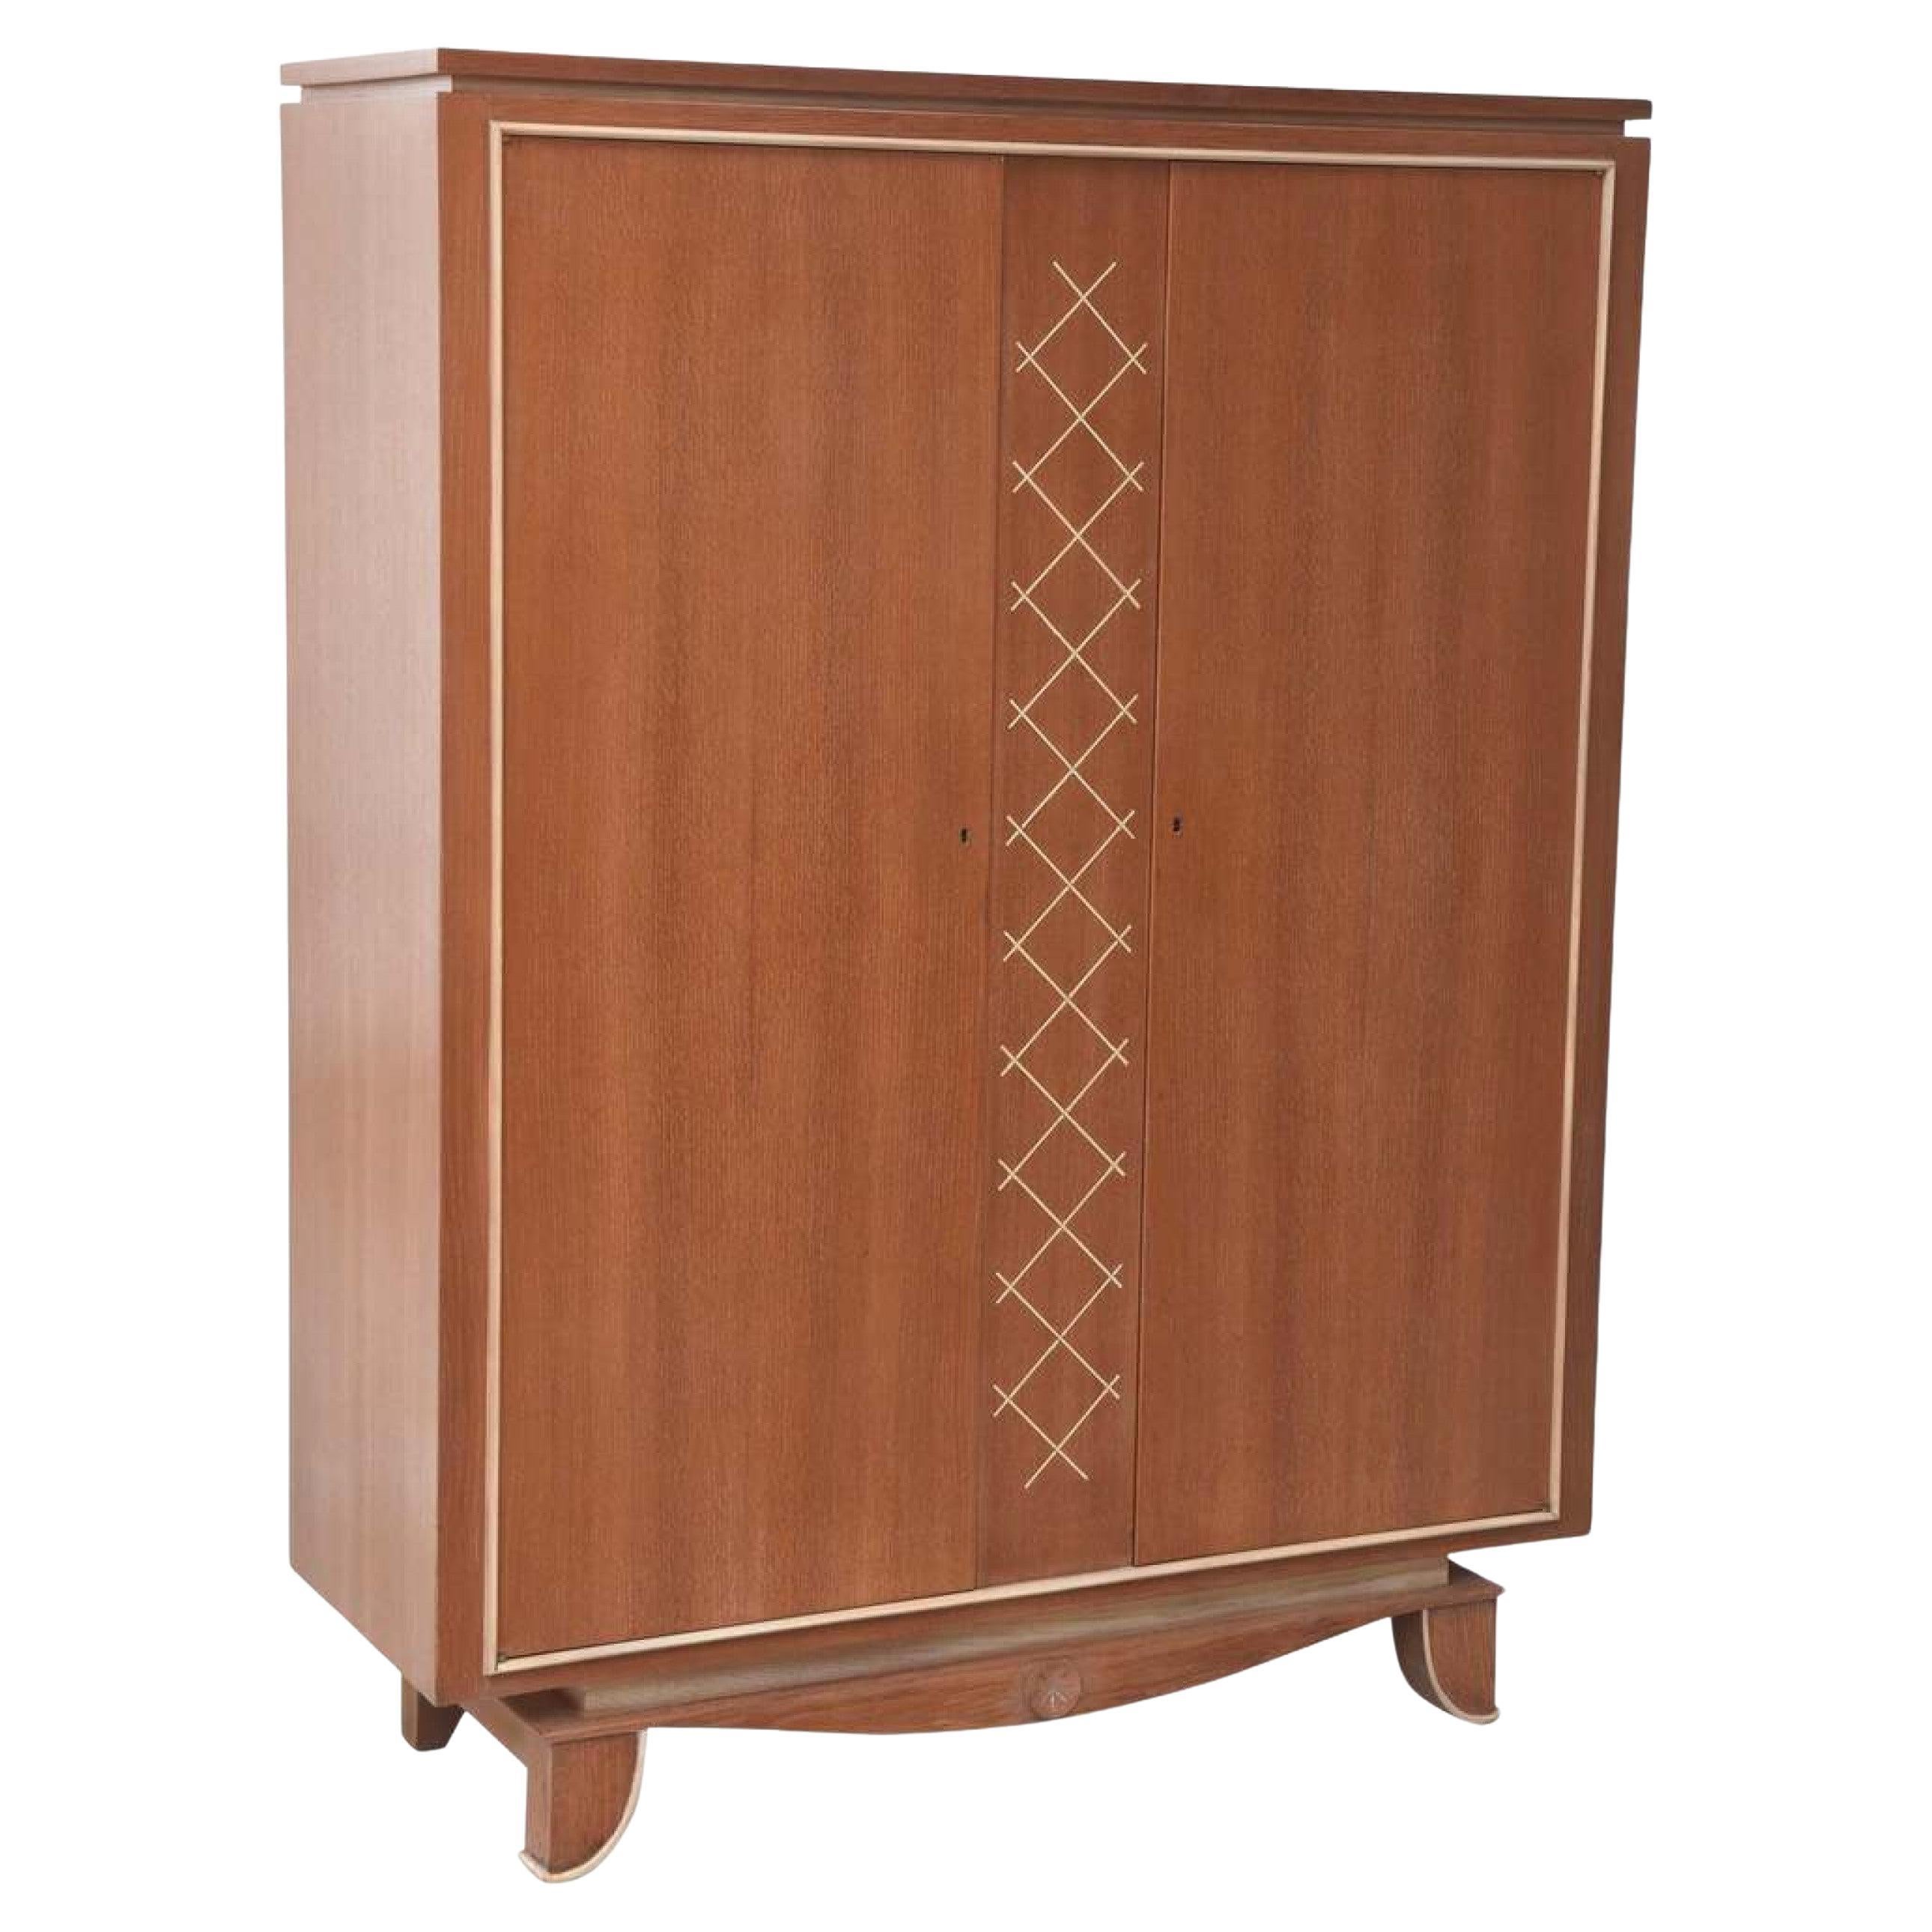 Pierre Petit Midcentury French Modern Limed Oak and Parchment Tall Cabinet For Sale